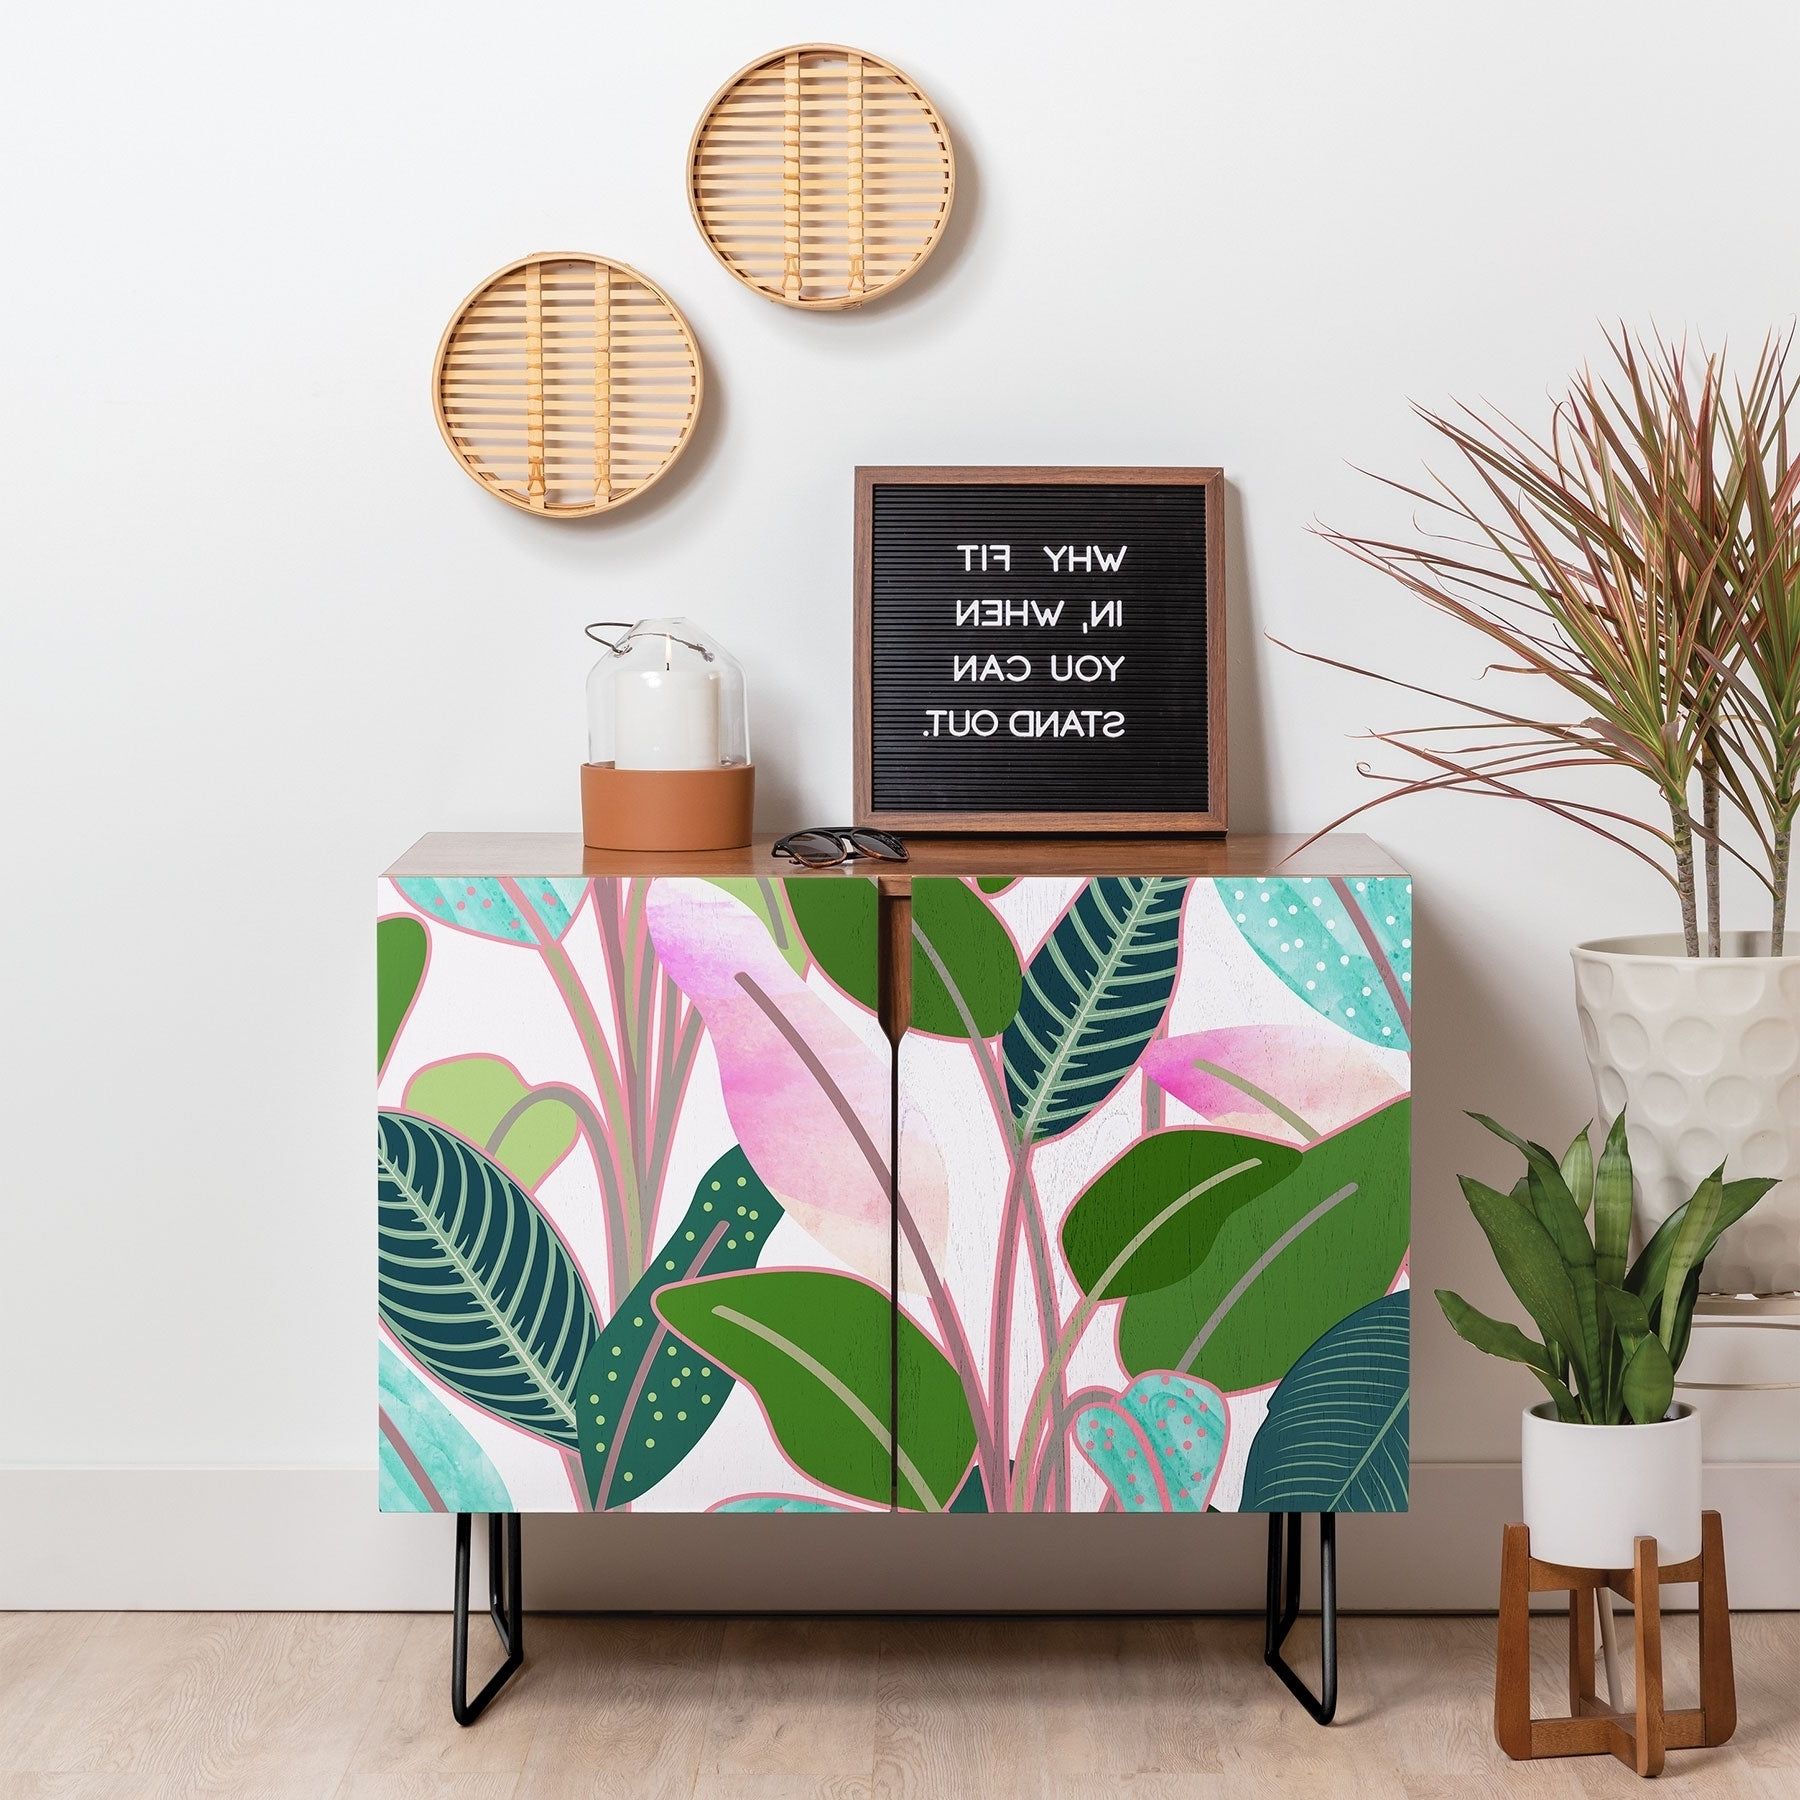 Deny Designs Colorful Leaves Credenza (birch Or Walnut, 2 Leg Options) Inside Colorful Leaves Credenzas (Gallery 1 of 20)